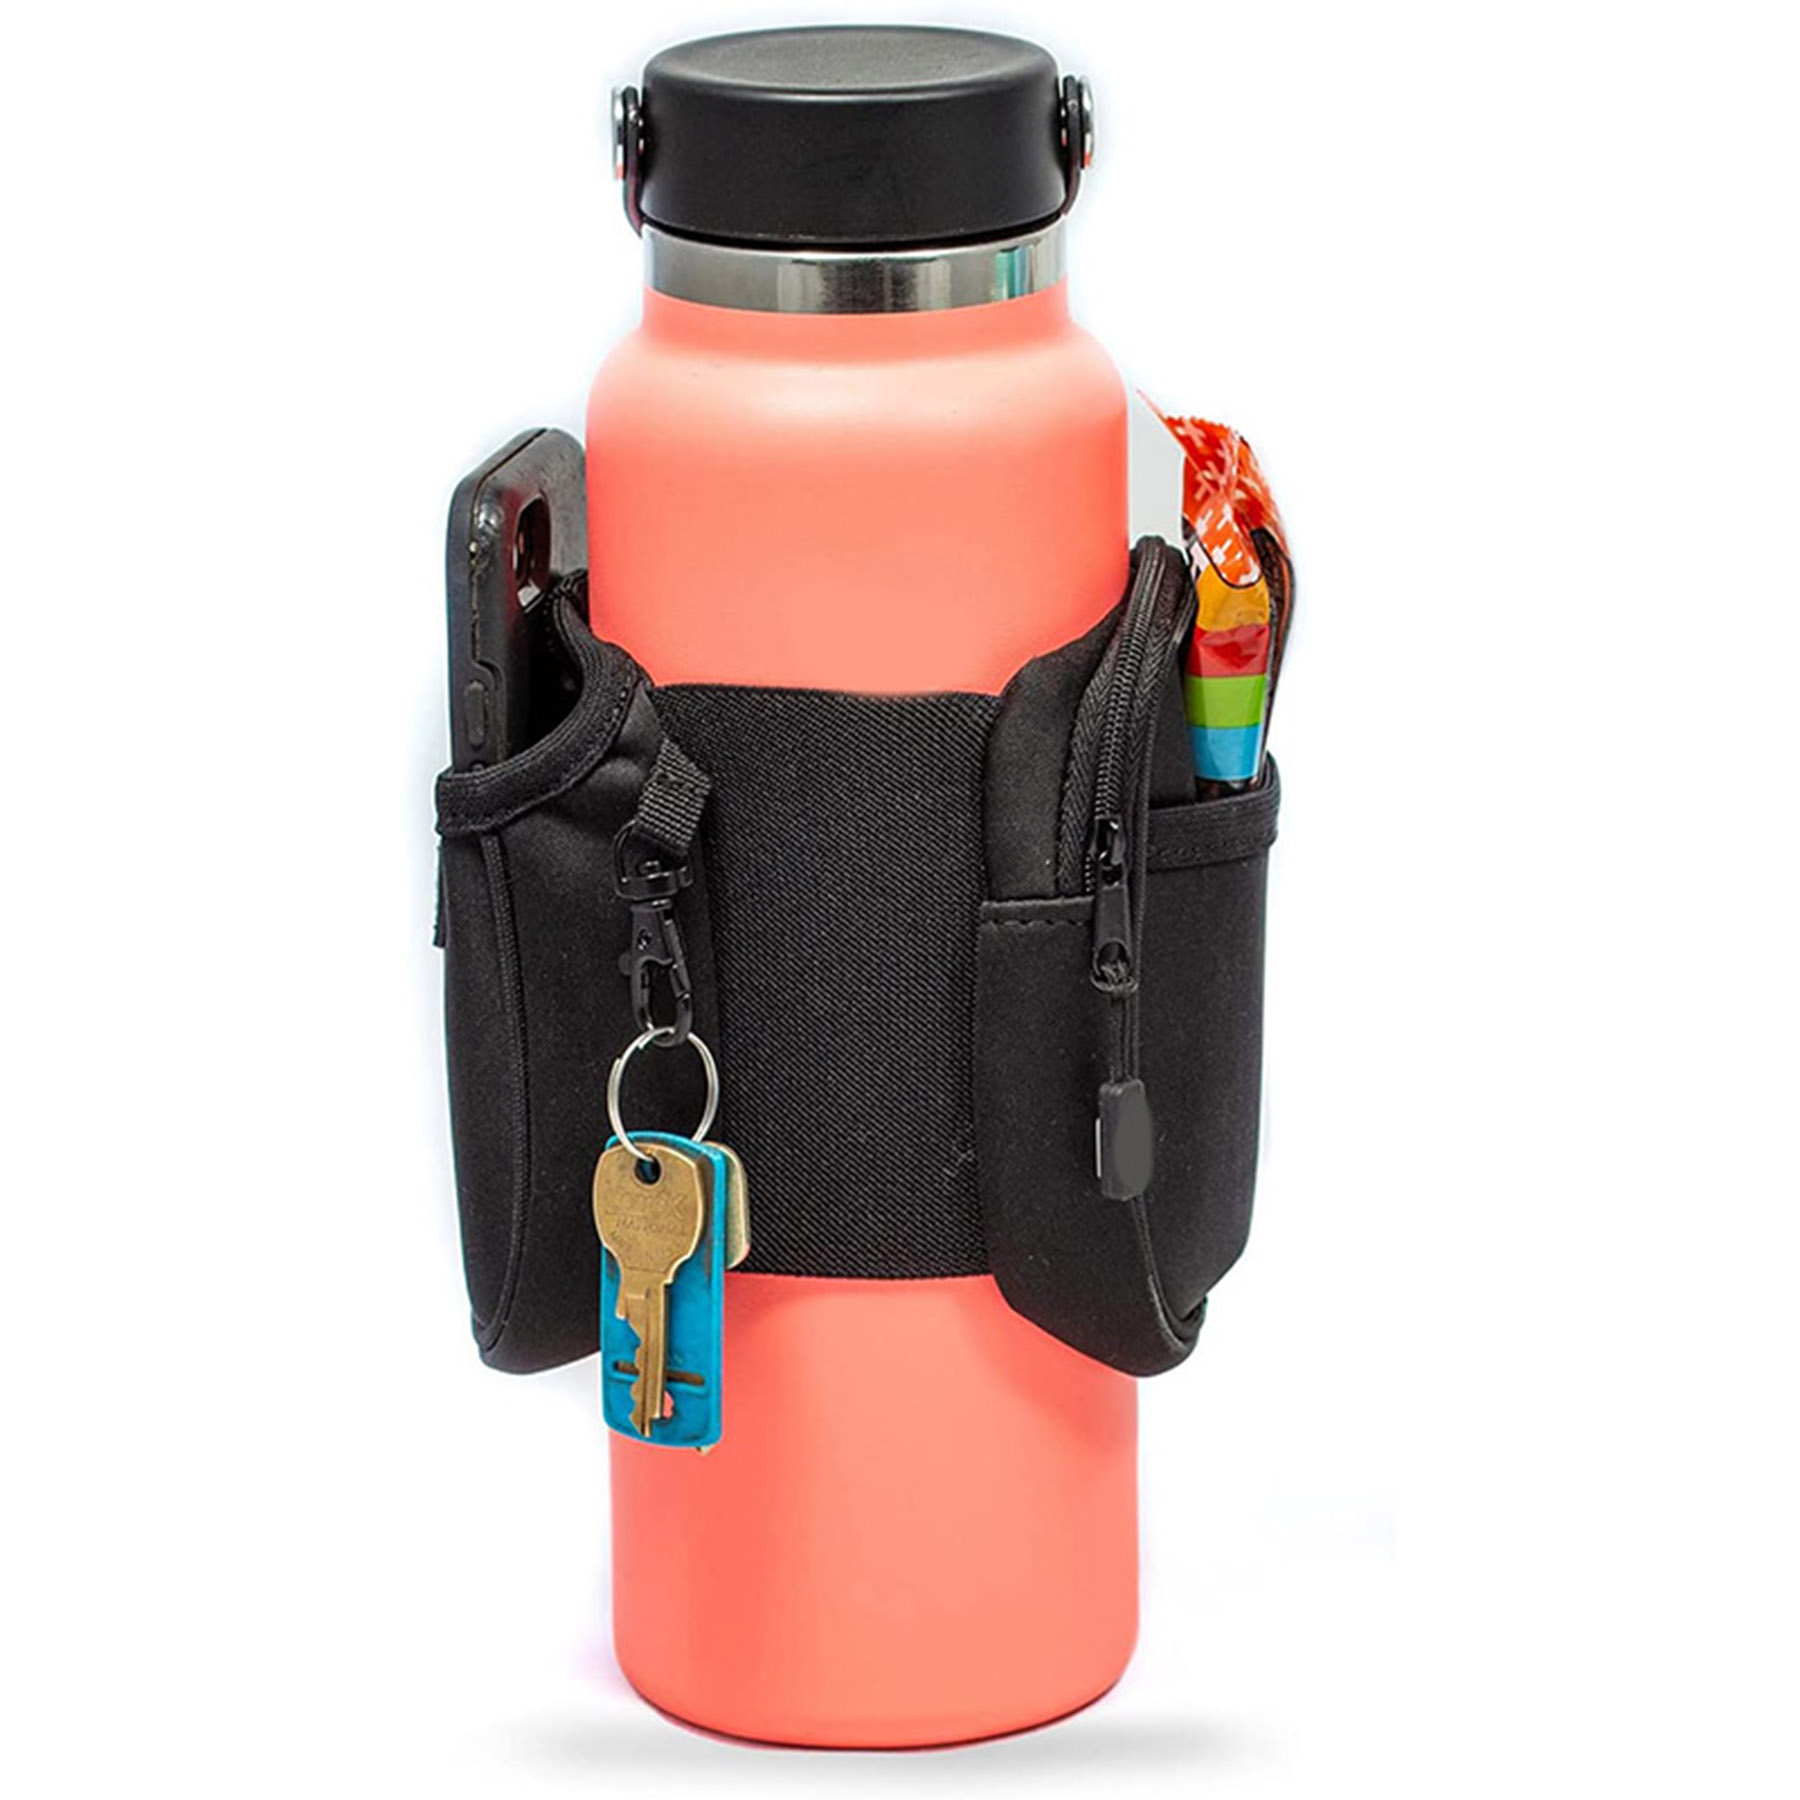 Gym Water Bottle Pouch Sleeve with Zipper Side Storage Pockets